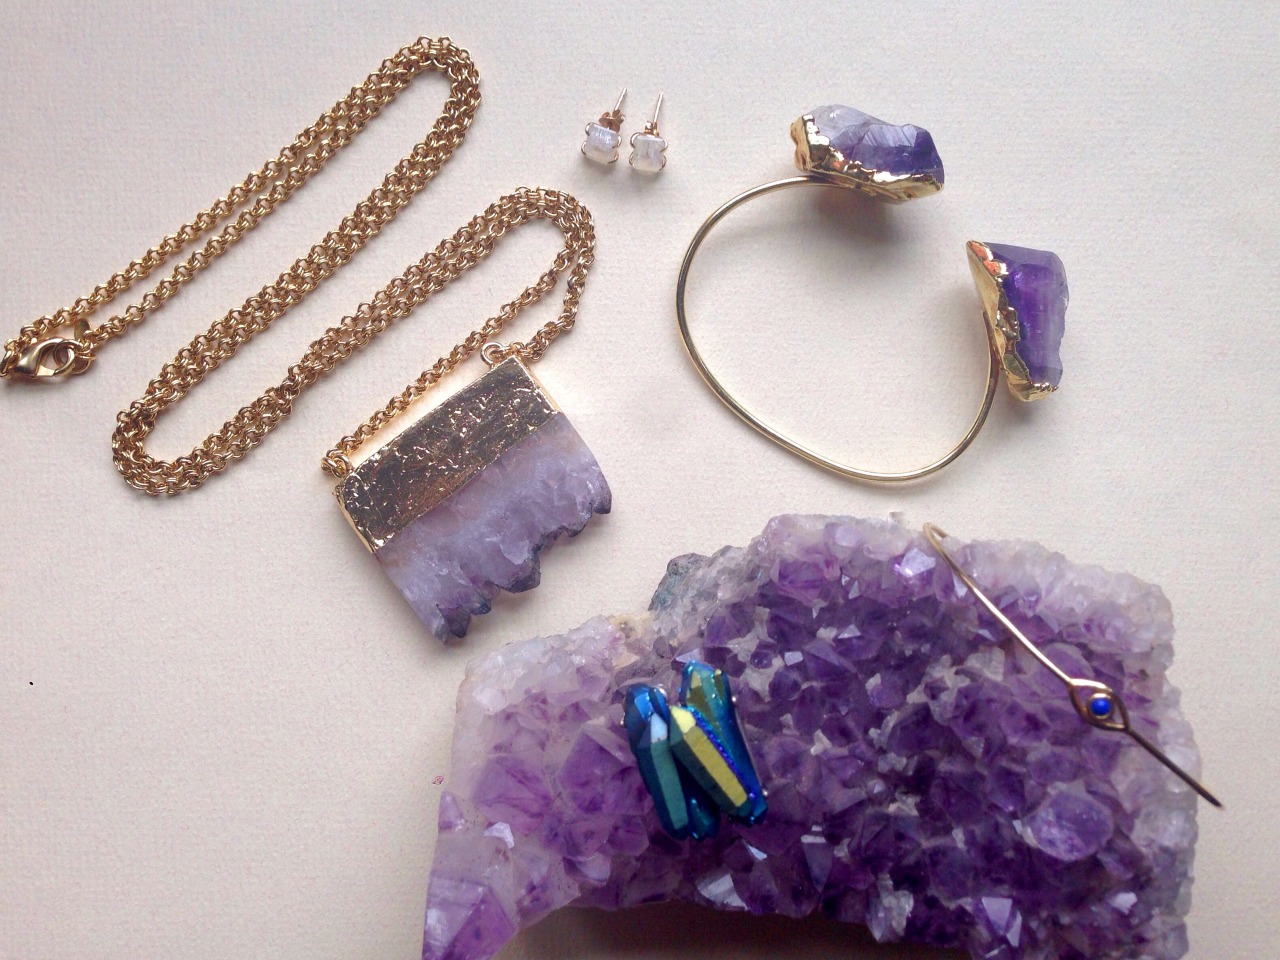 cassielifts:
“candylifter:
“wishlift:
“Anthropologie:
Quartz Necklace: $98
Moonstone Earrings: $68
Amethyst Cuff: $88
Evil Eye Bracelet: One of a set ~$16
Forever 21:
Crystal Point Earrings: $4.90
”
urgh too pretty
”
Oh my goodness this is...